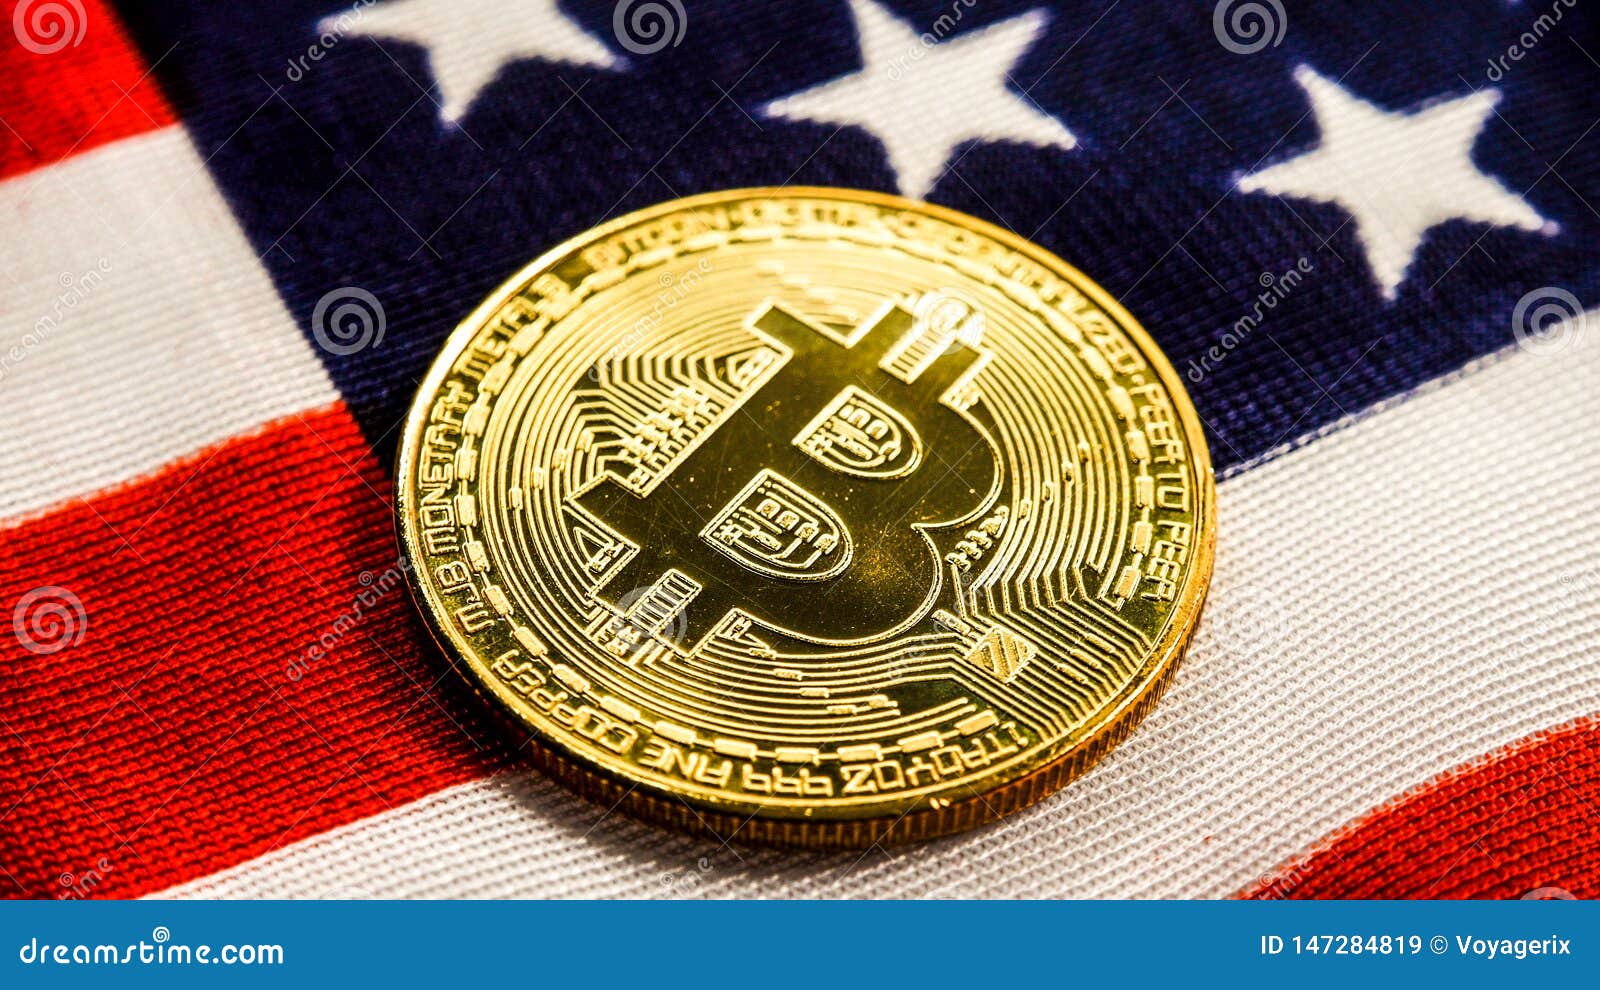 united states crypto currency